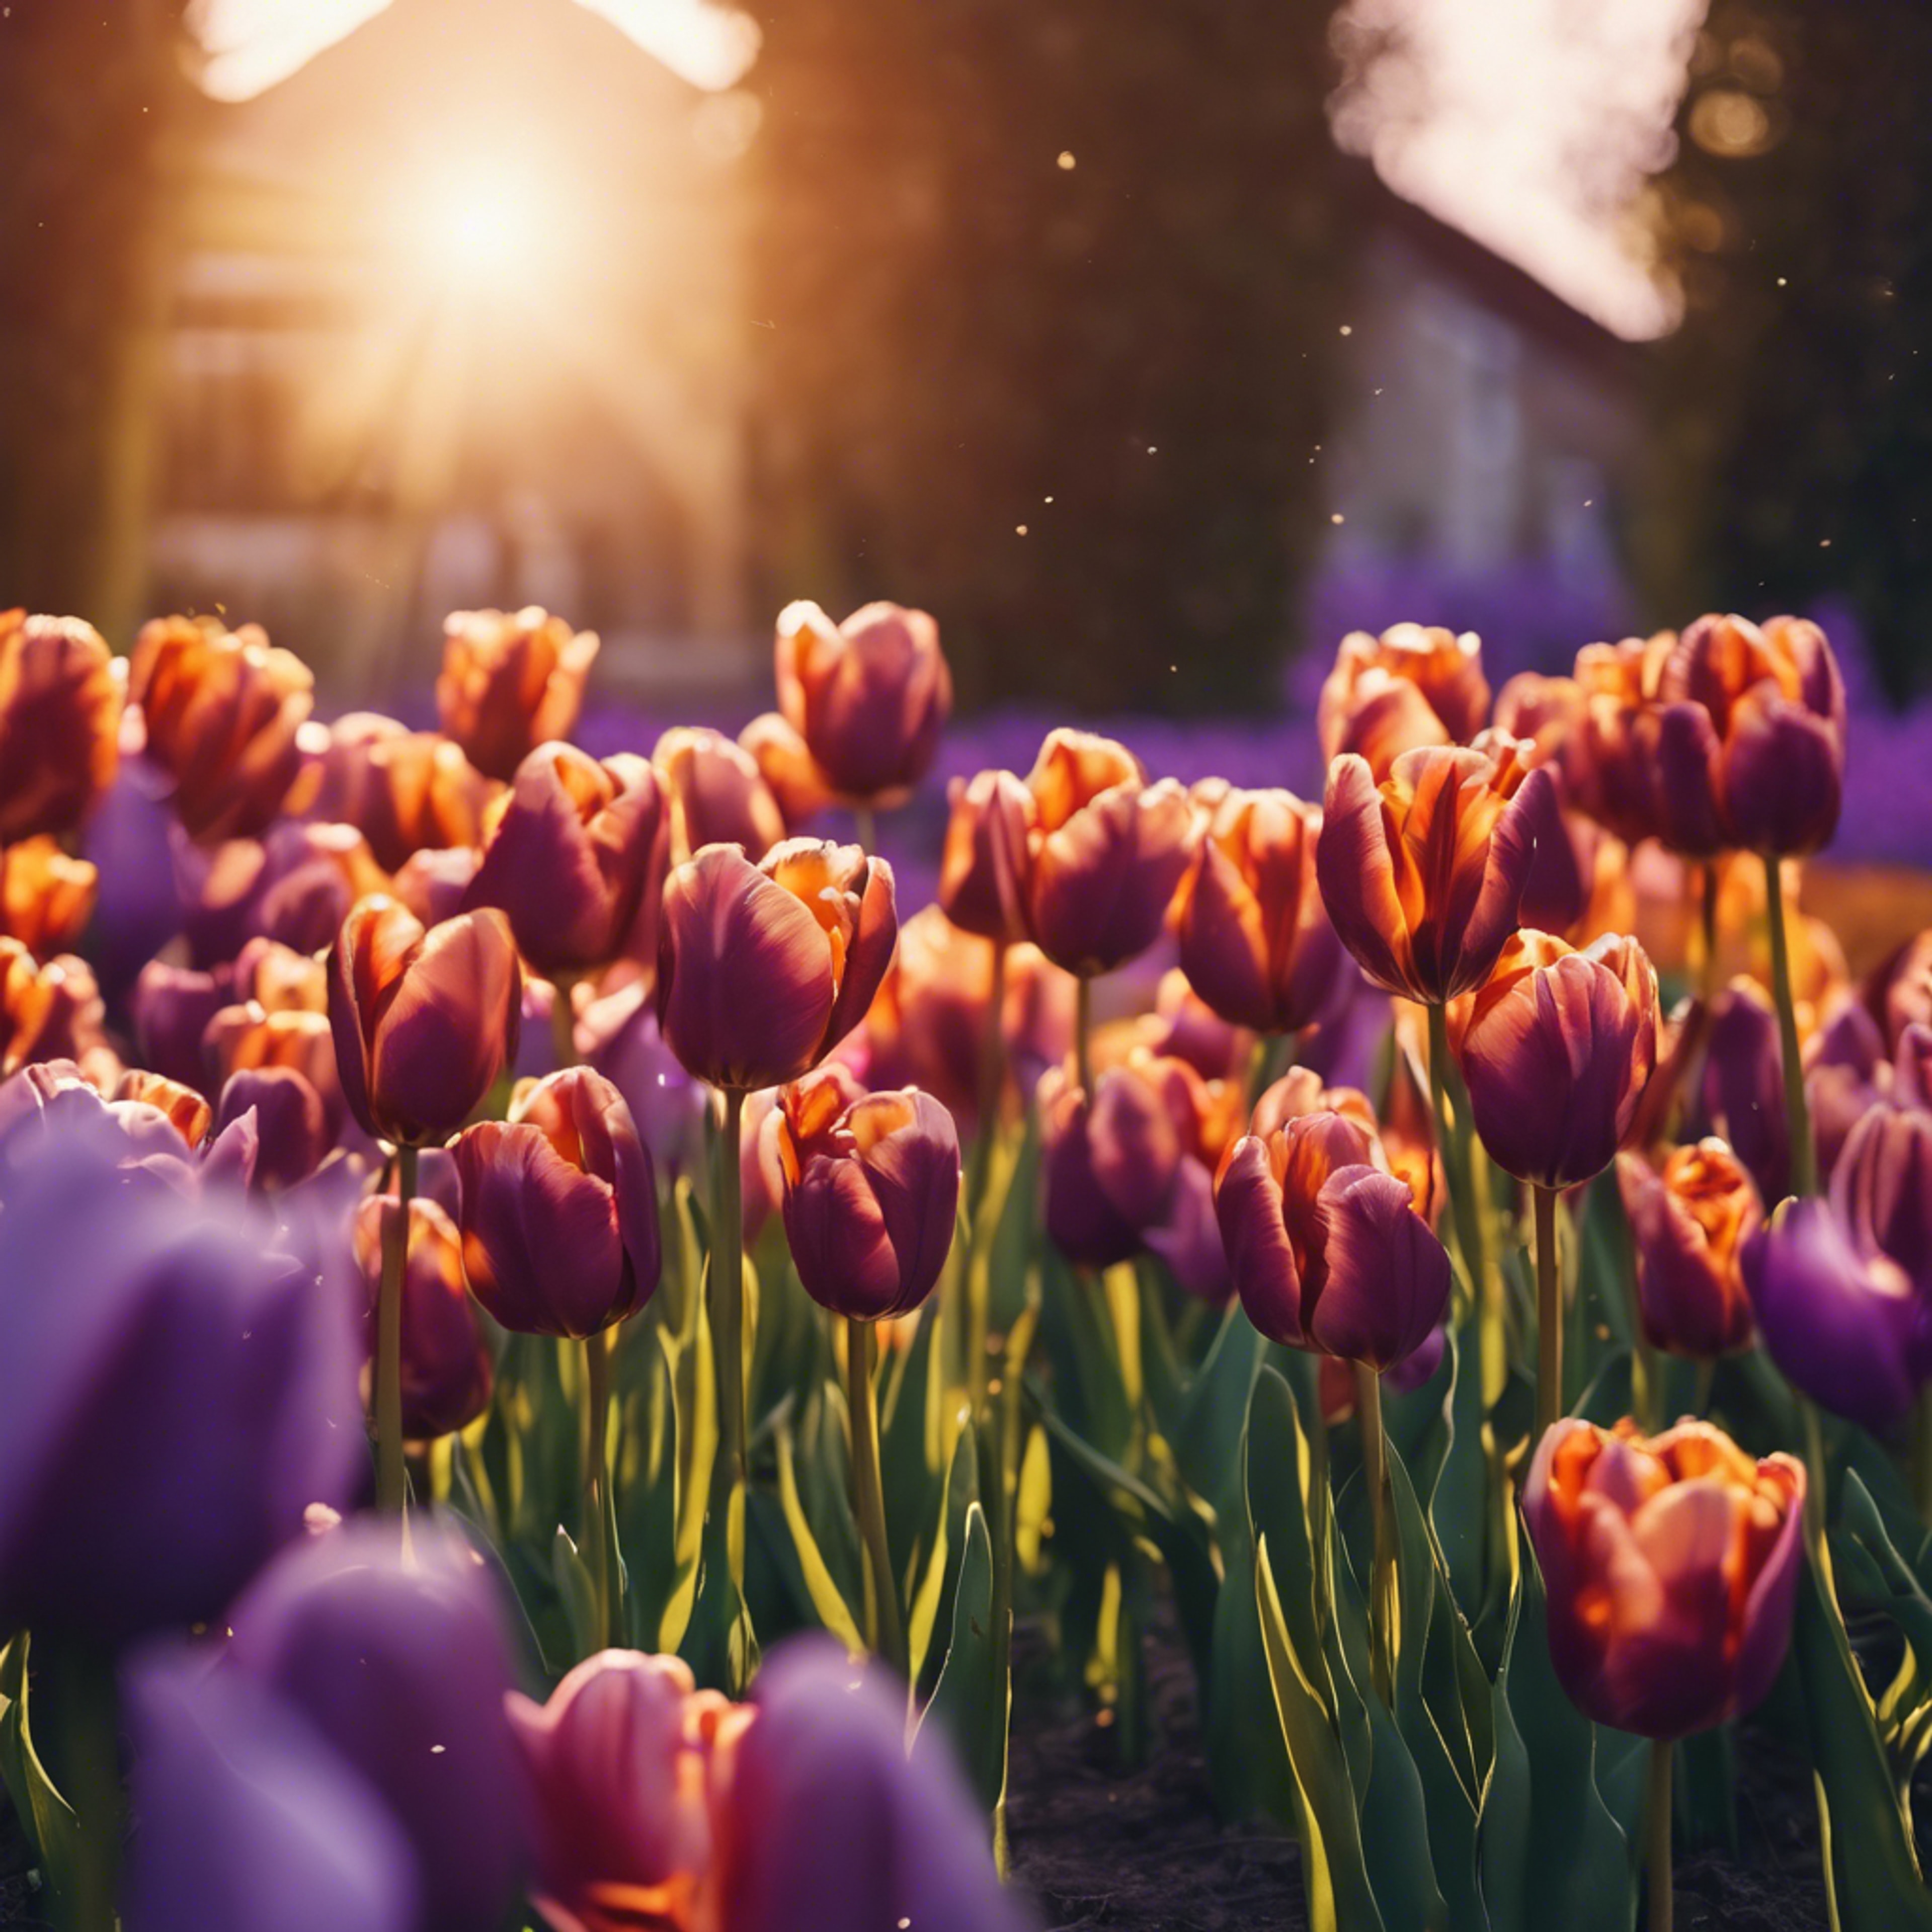 Tulips in a garden, bathed in the purple and orange rays of the setting sun. 벽지[929499f715404d6e96f8]